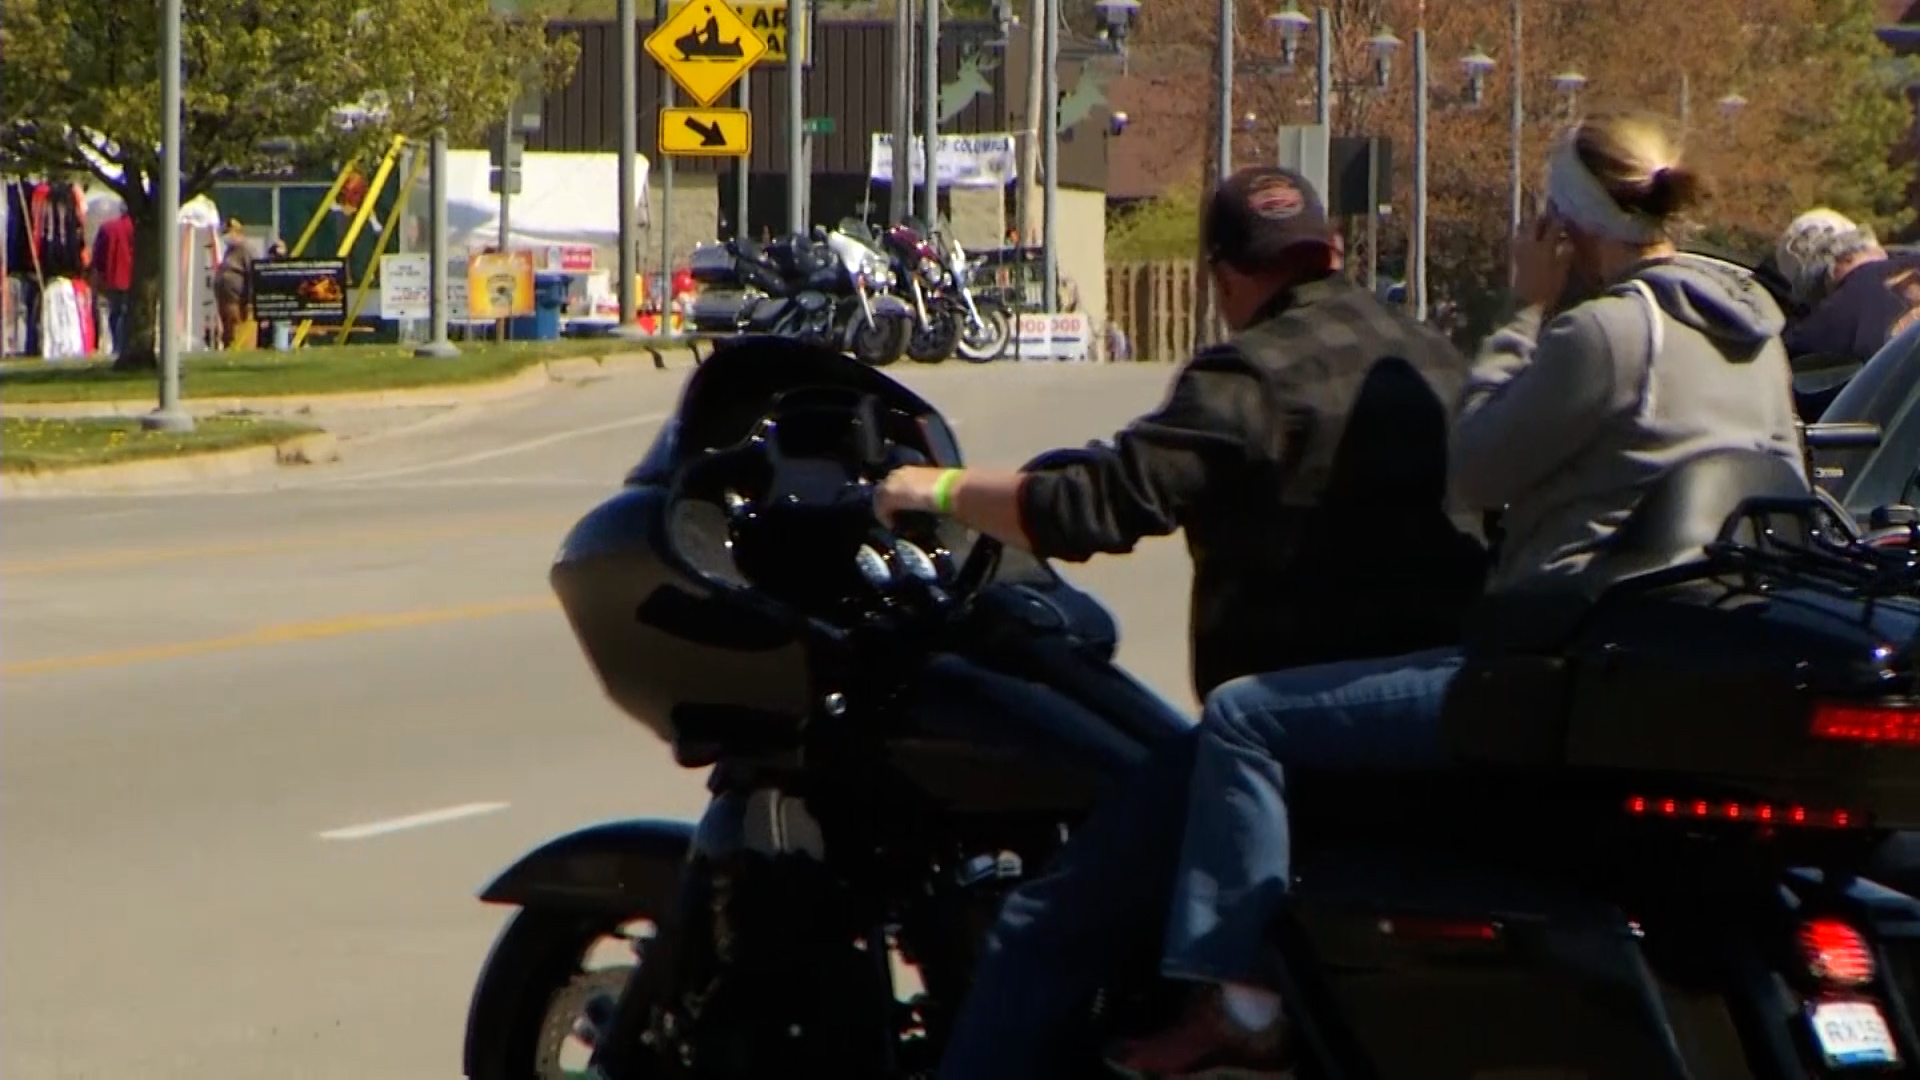 Local law enforcement urges extra caution during Motorcycle Safety Awareness Month